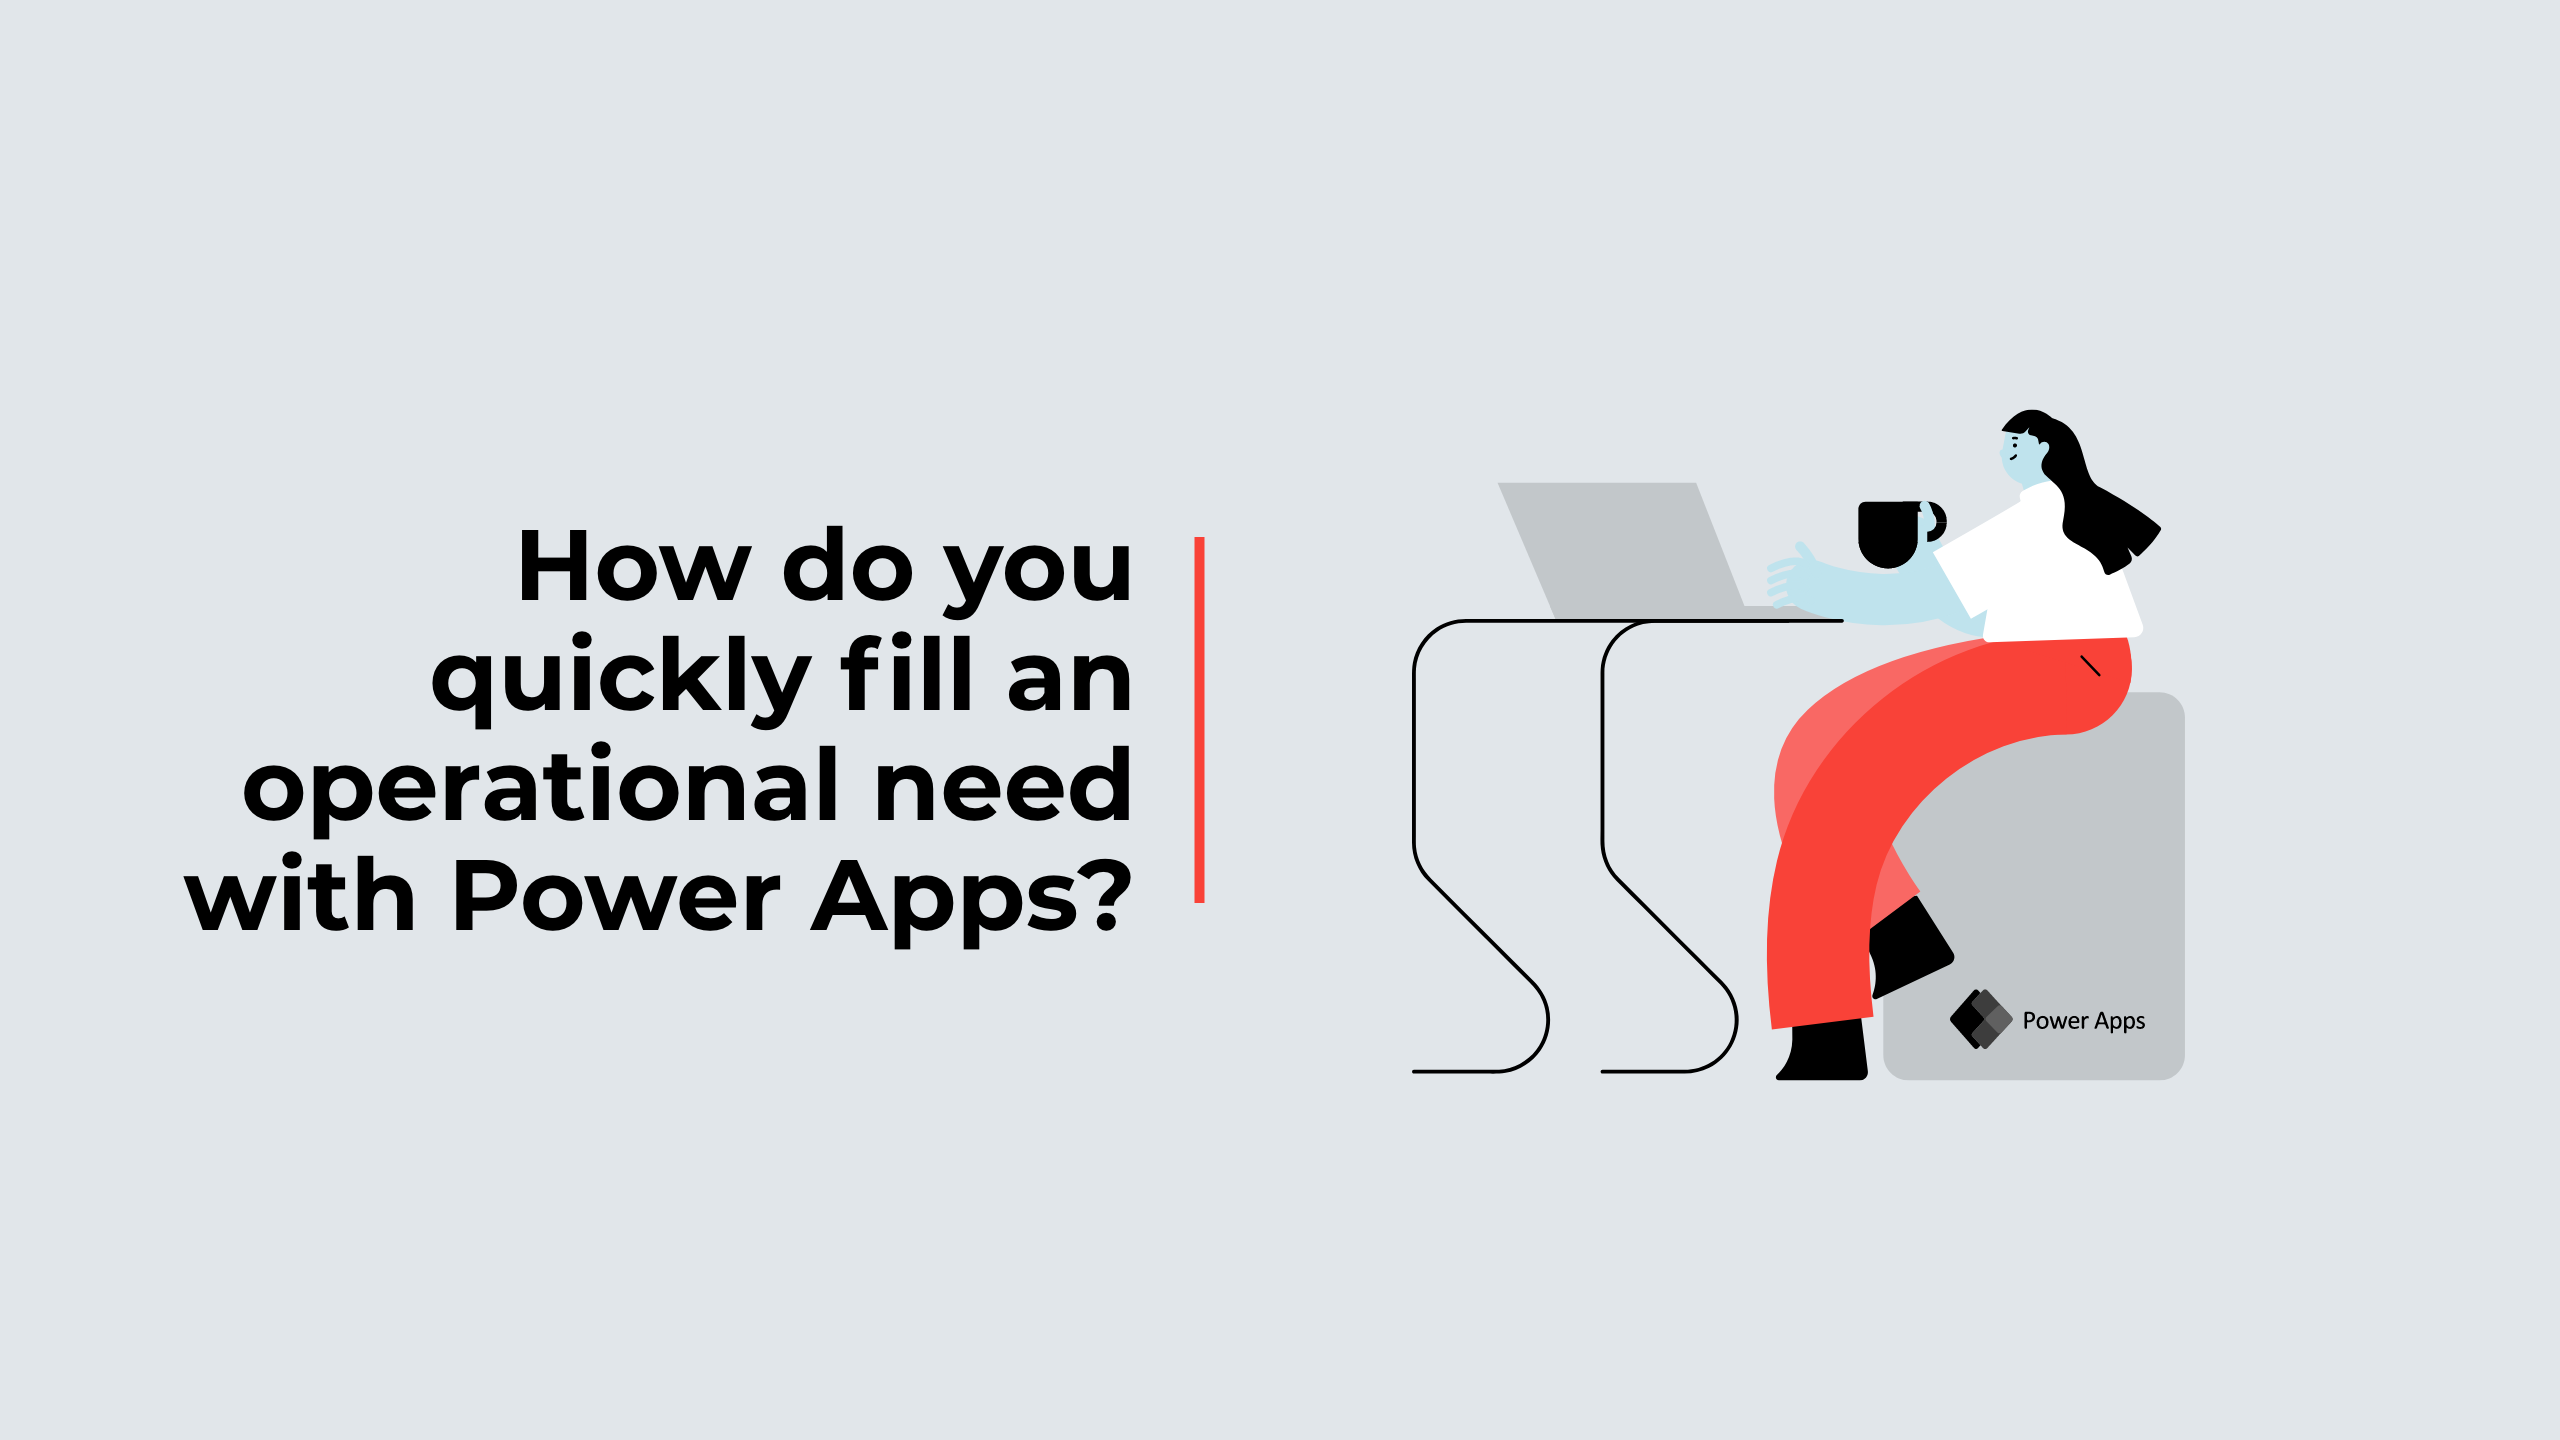 How do you quickly fill an operational need with Power Apps?